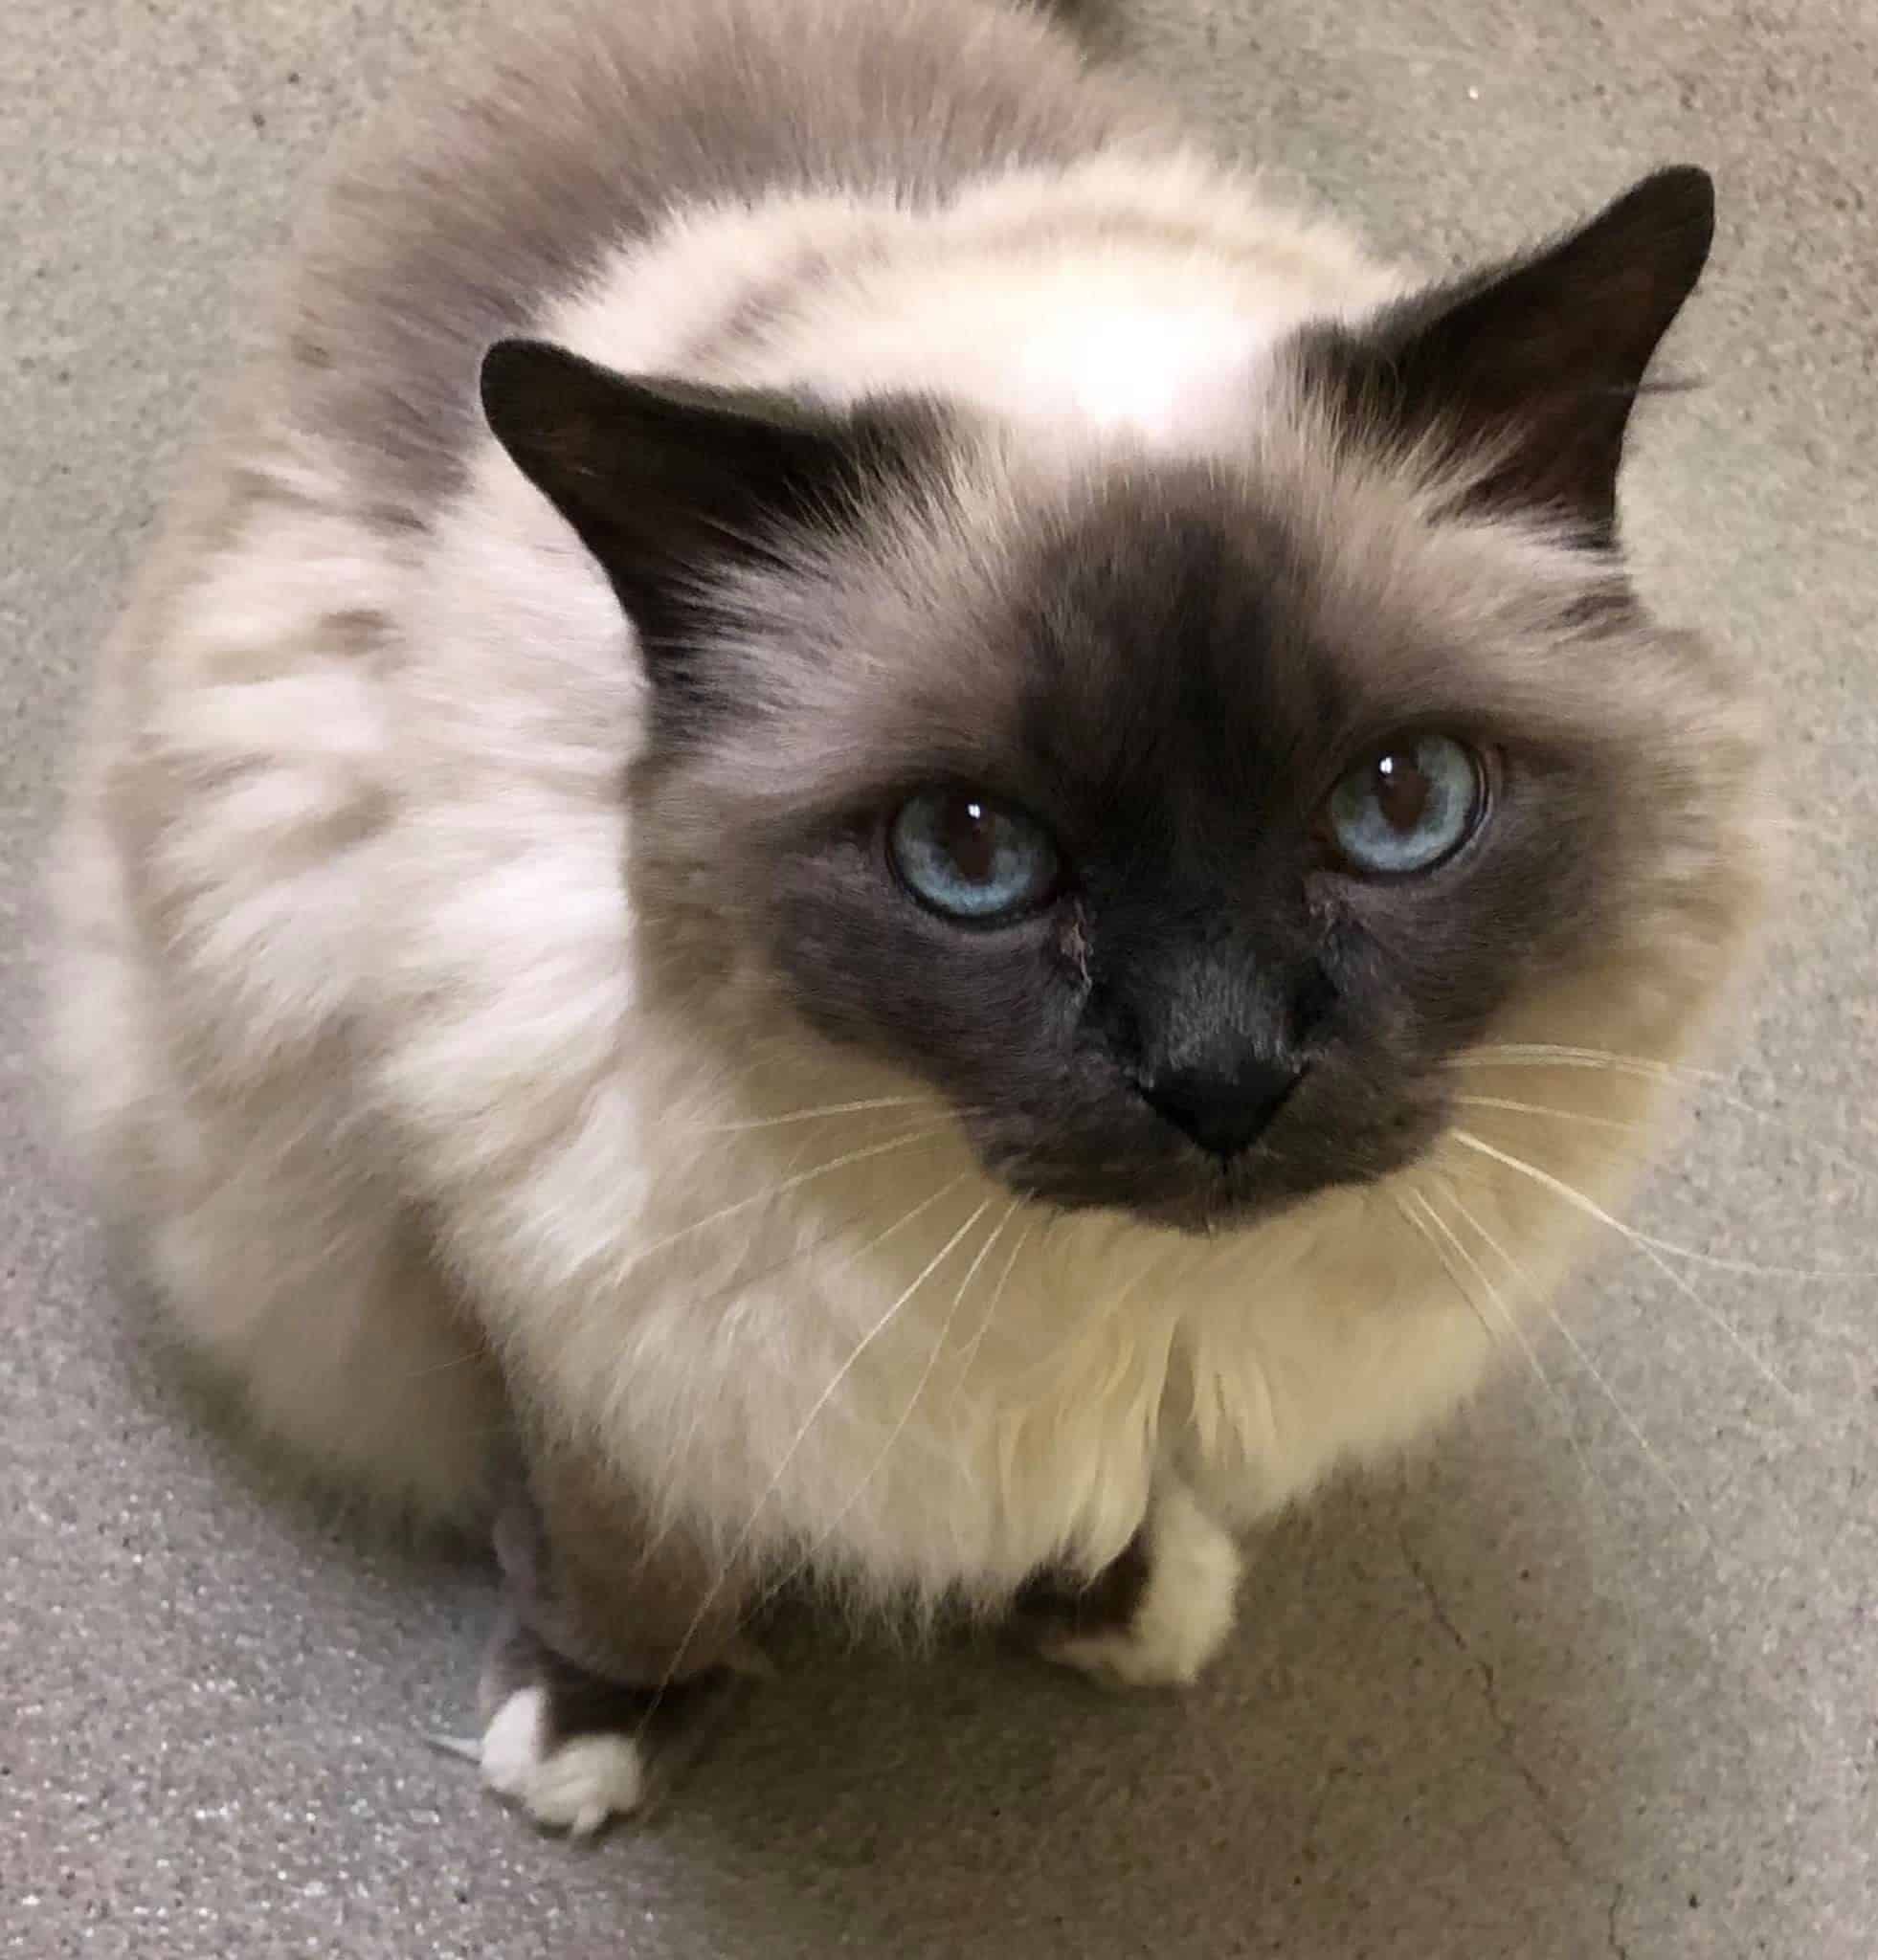 With Update Two 16 Year Old Birman Cats Relinquished To Shelter With Heartbreaking Note By Sobbing Owner Entering Nursing Home Cole Marmalade